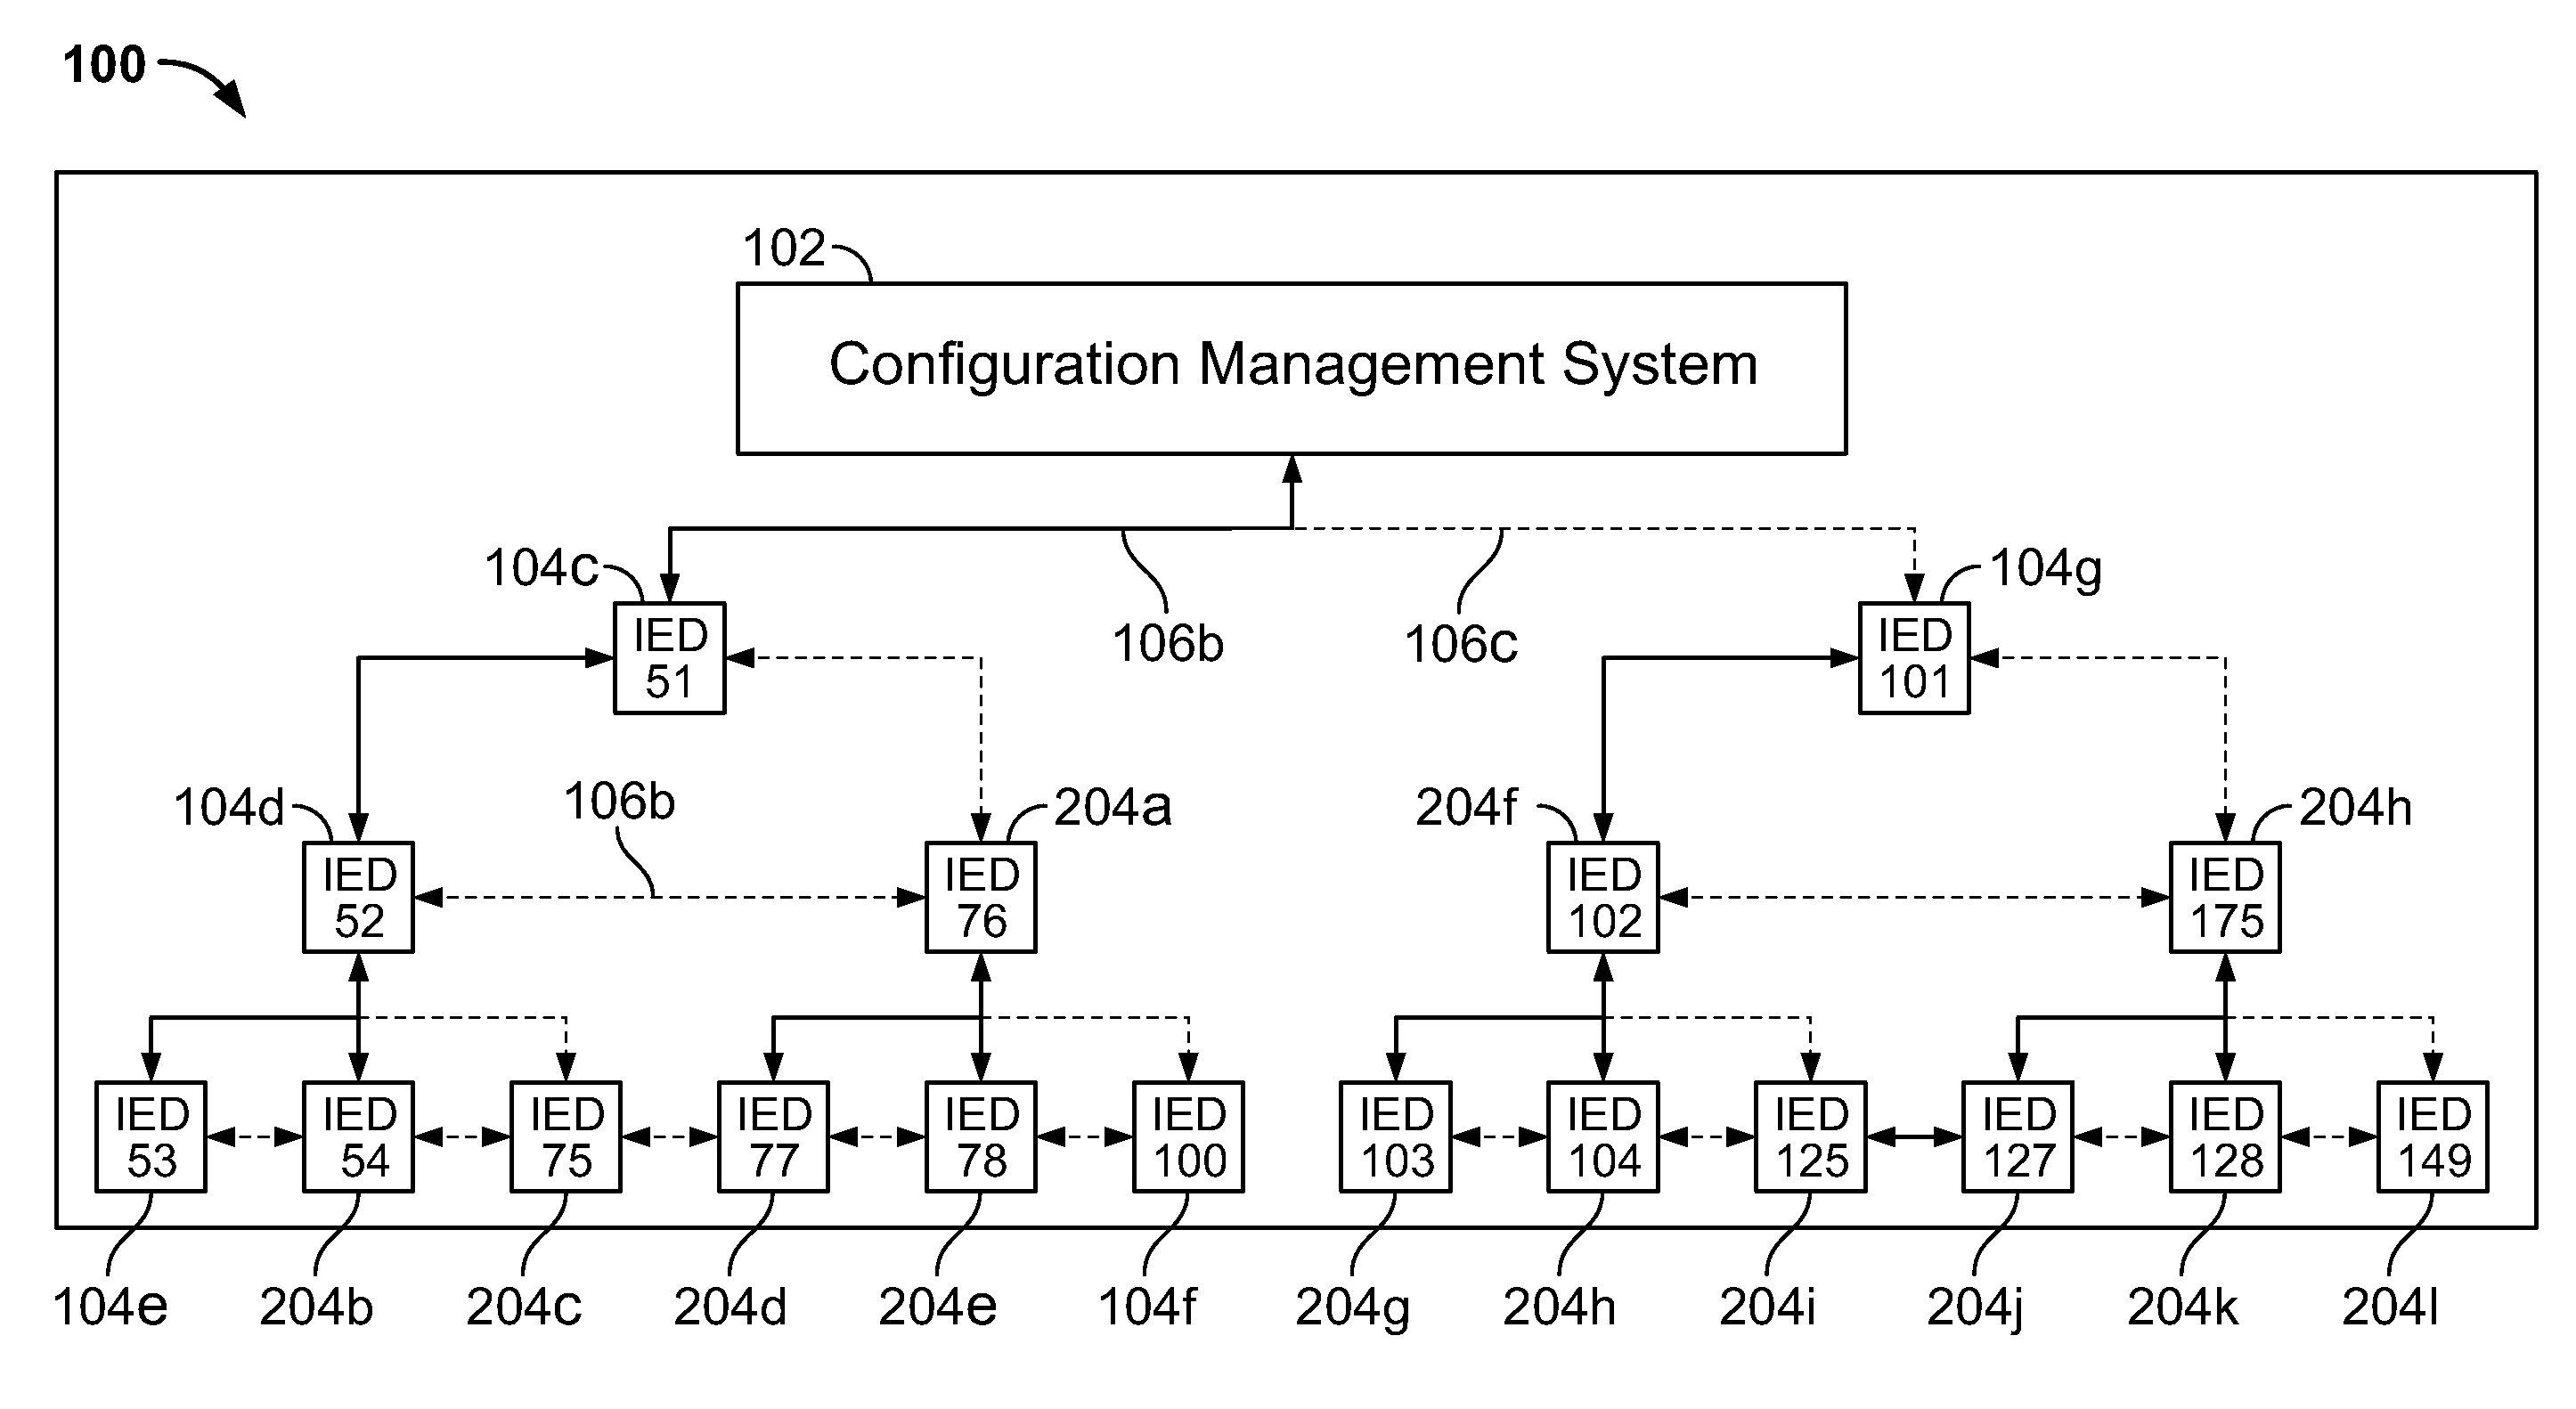 Method and system for cascading peer-to-peer configuration of large systems of ieds